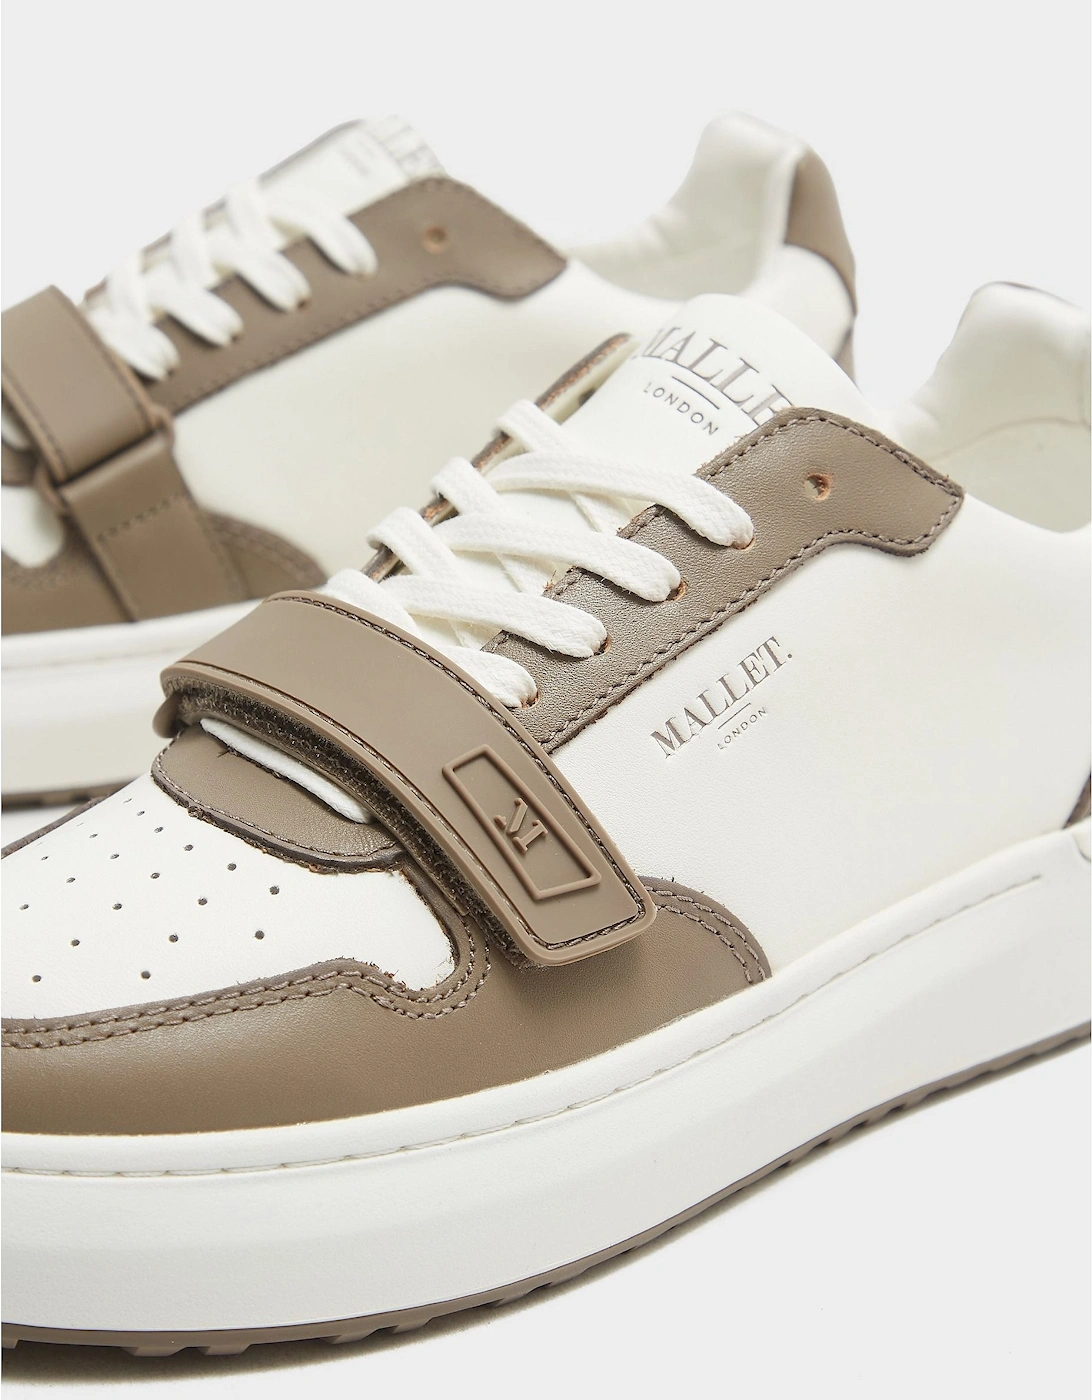 Womens Hoxton Wing Trainers